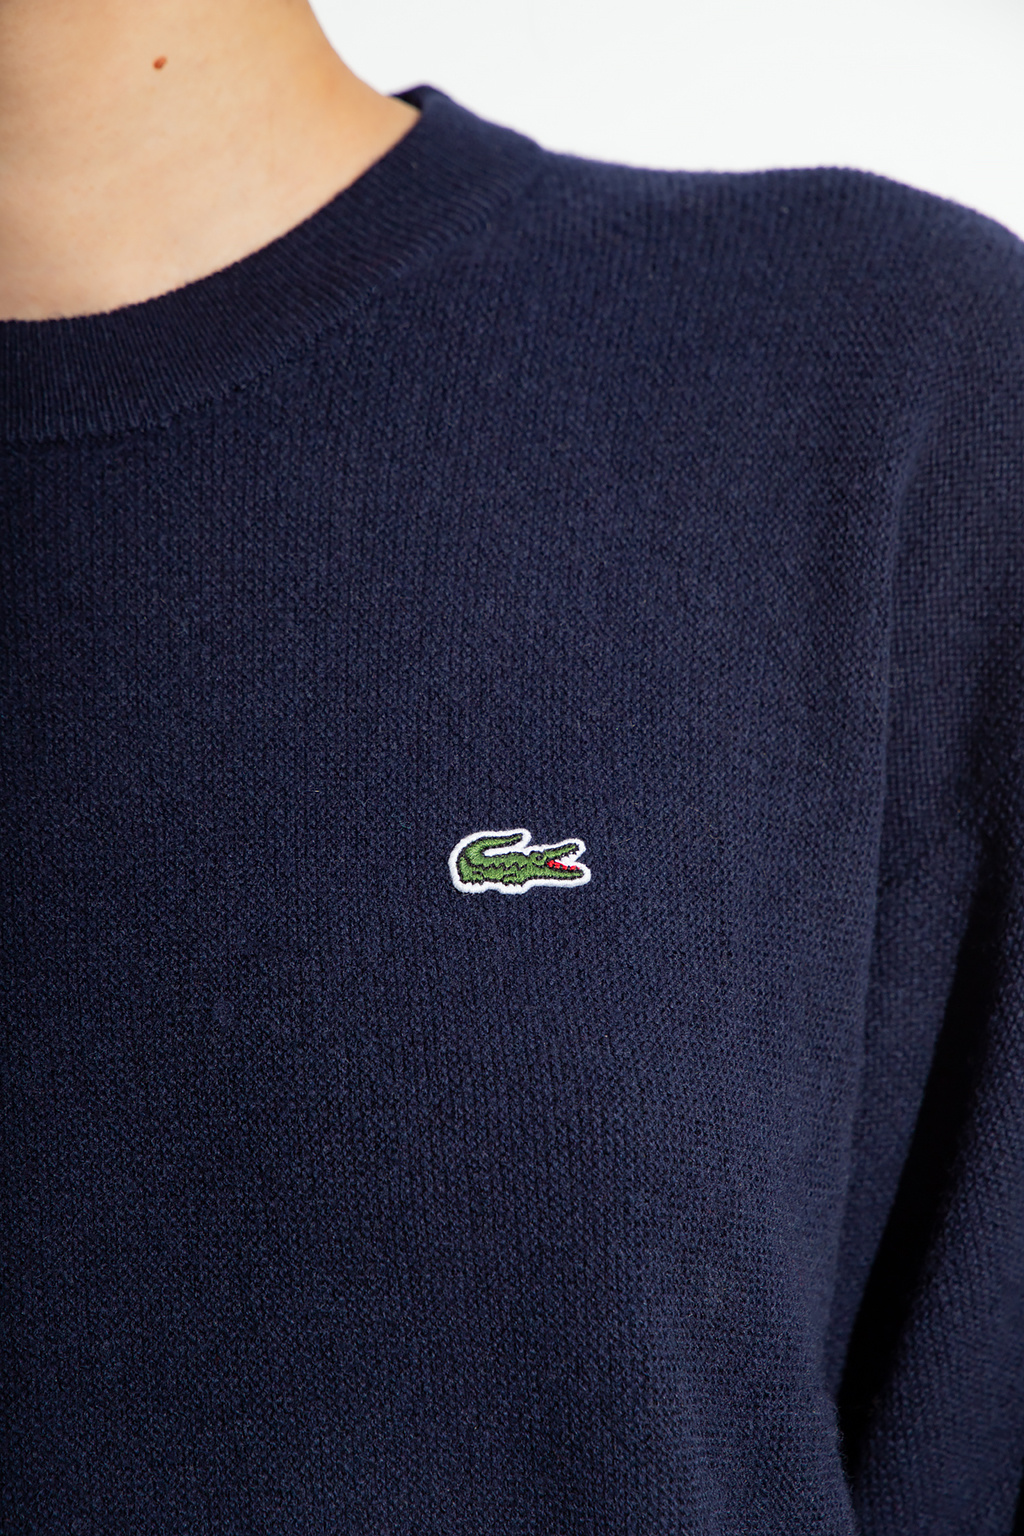 Lacoste The Lacoste and L002 Unlock the Unique in All of Us